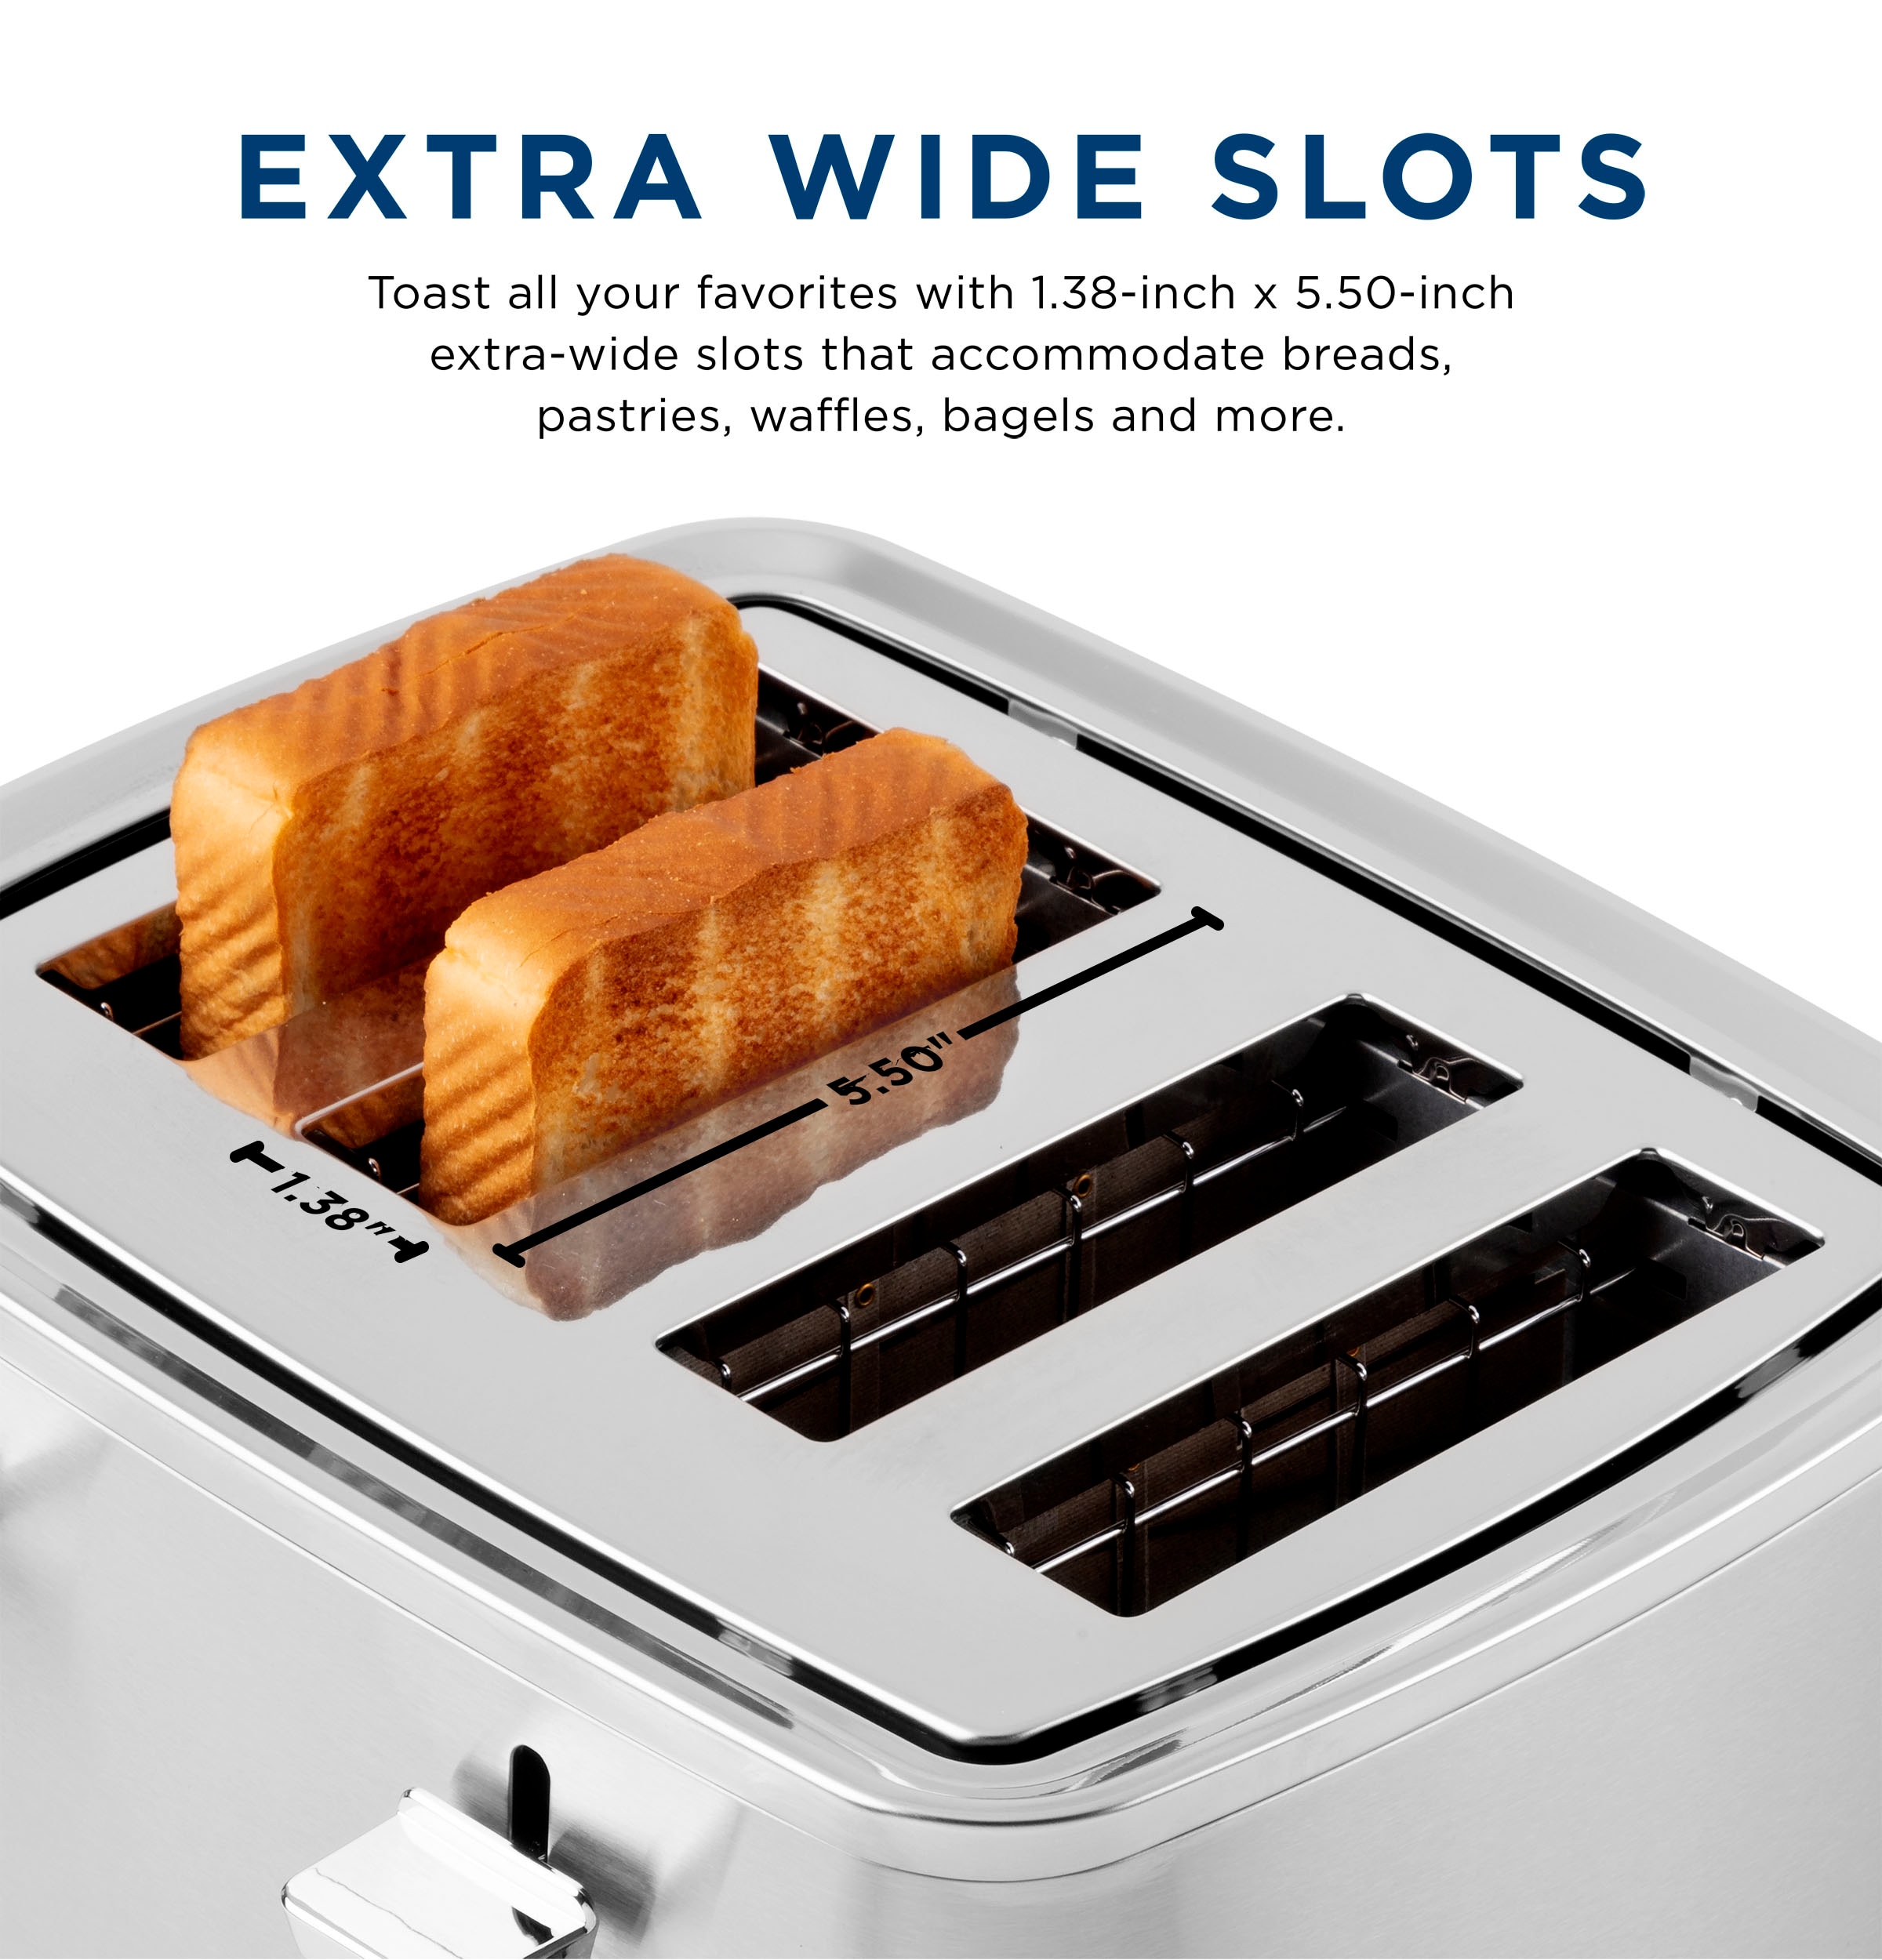  GE Stainless Steel Toaster, 4 Slice, Extra Wide Slots for  Toasting Bagels, Breads, Waffles & More, 7 Shade Options for the Entire  Household to Enjoy